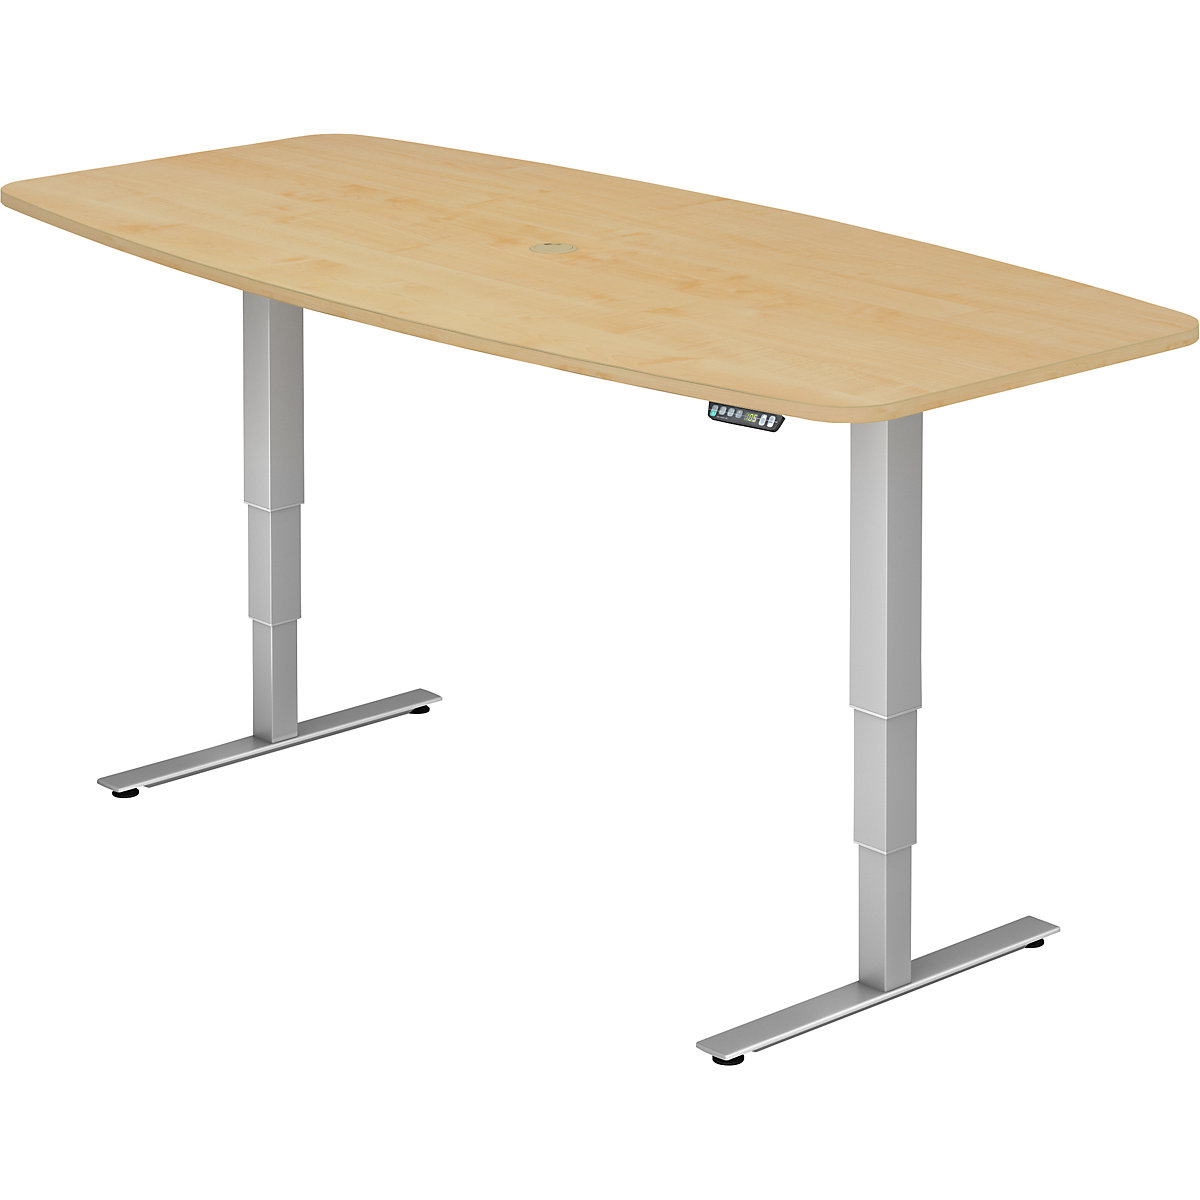 Conference table, WxD 2200 x 1030 mm, electric height adjustment from 620 – 1270 mm, maple finish-9